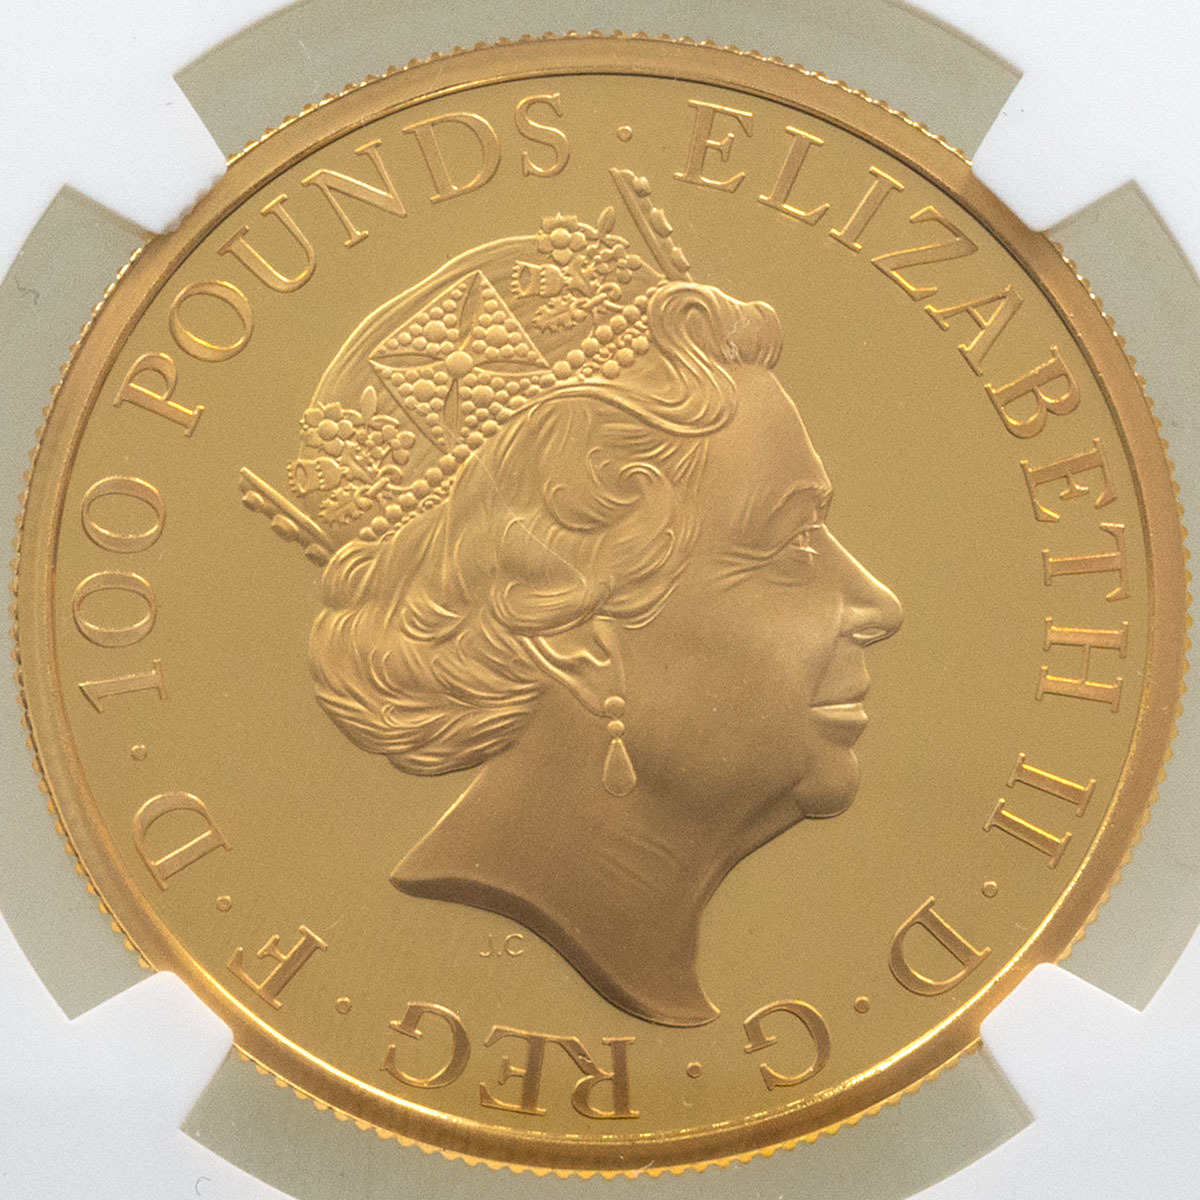 UK19QYGP 2019 Queen's Beasts Yale Of Beaufort One Ounce Gold Proof Coin NGC Graded PF 70 Ultra Cameo Obverse